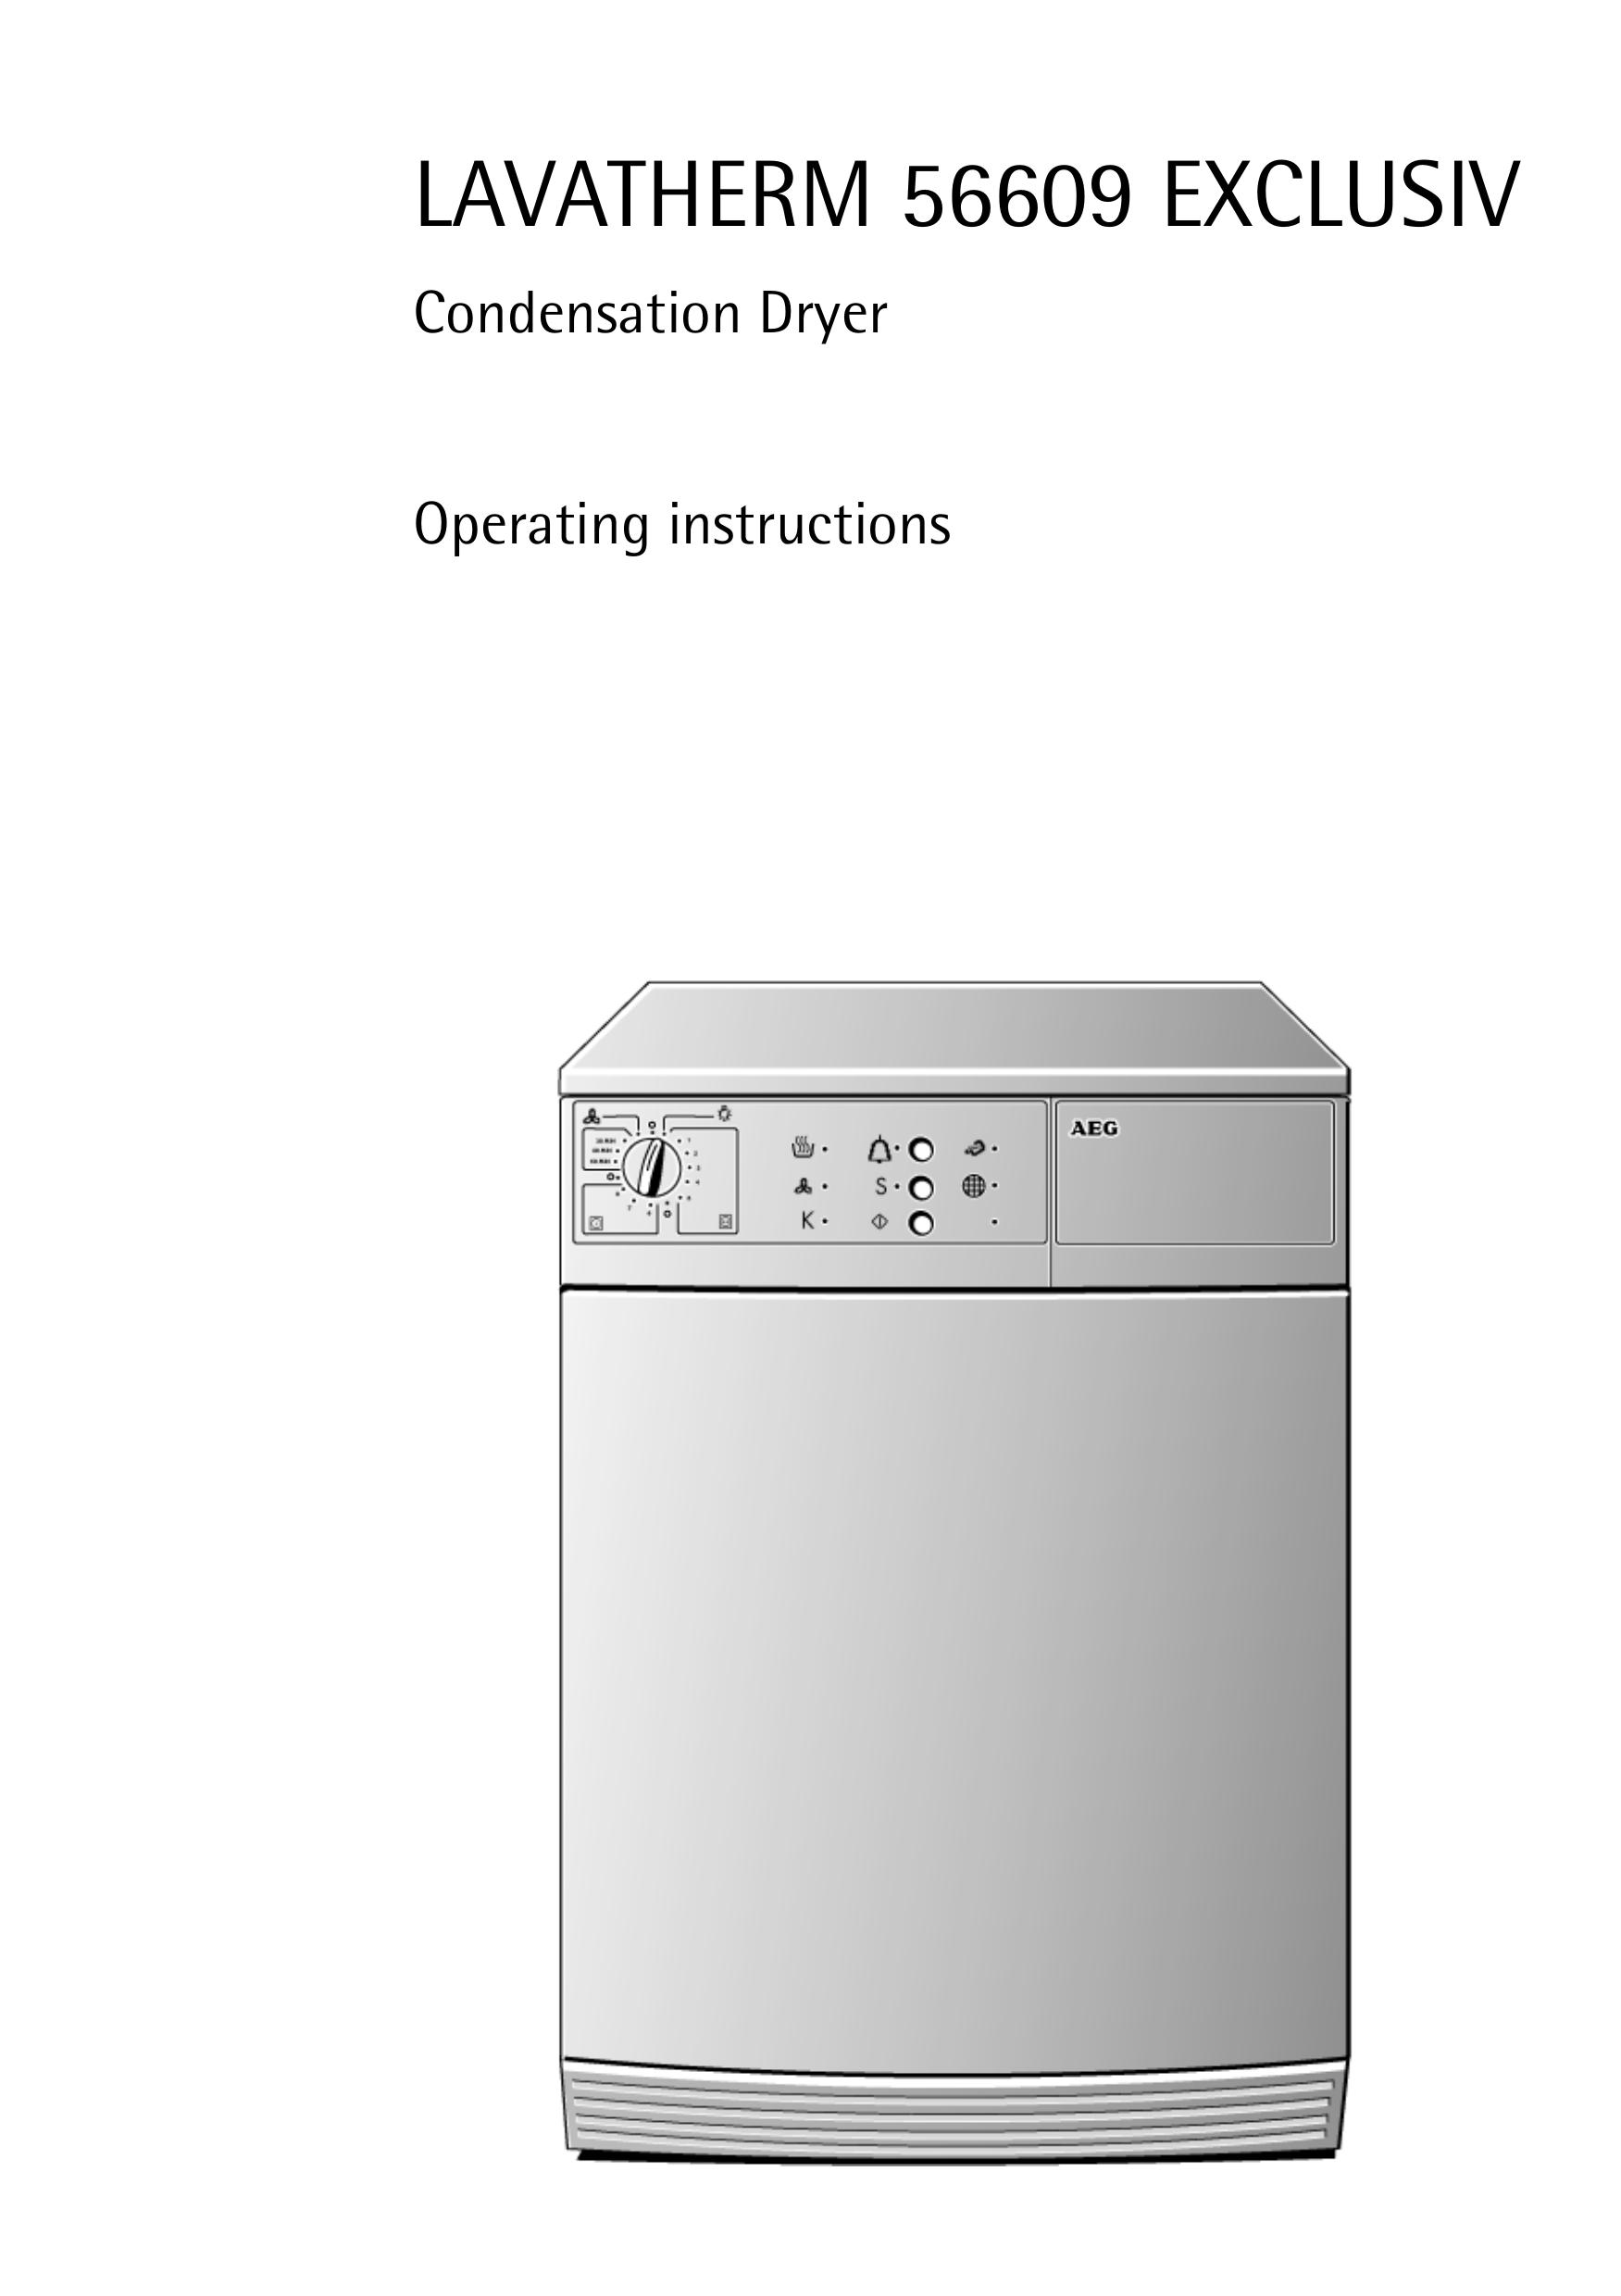 AEG 56609 Clothes Dryer User Manual